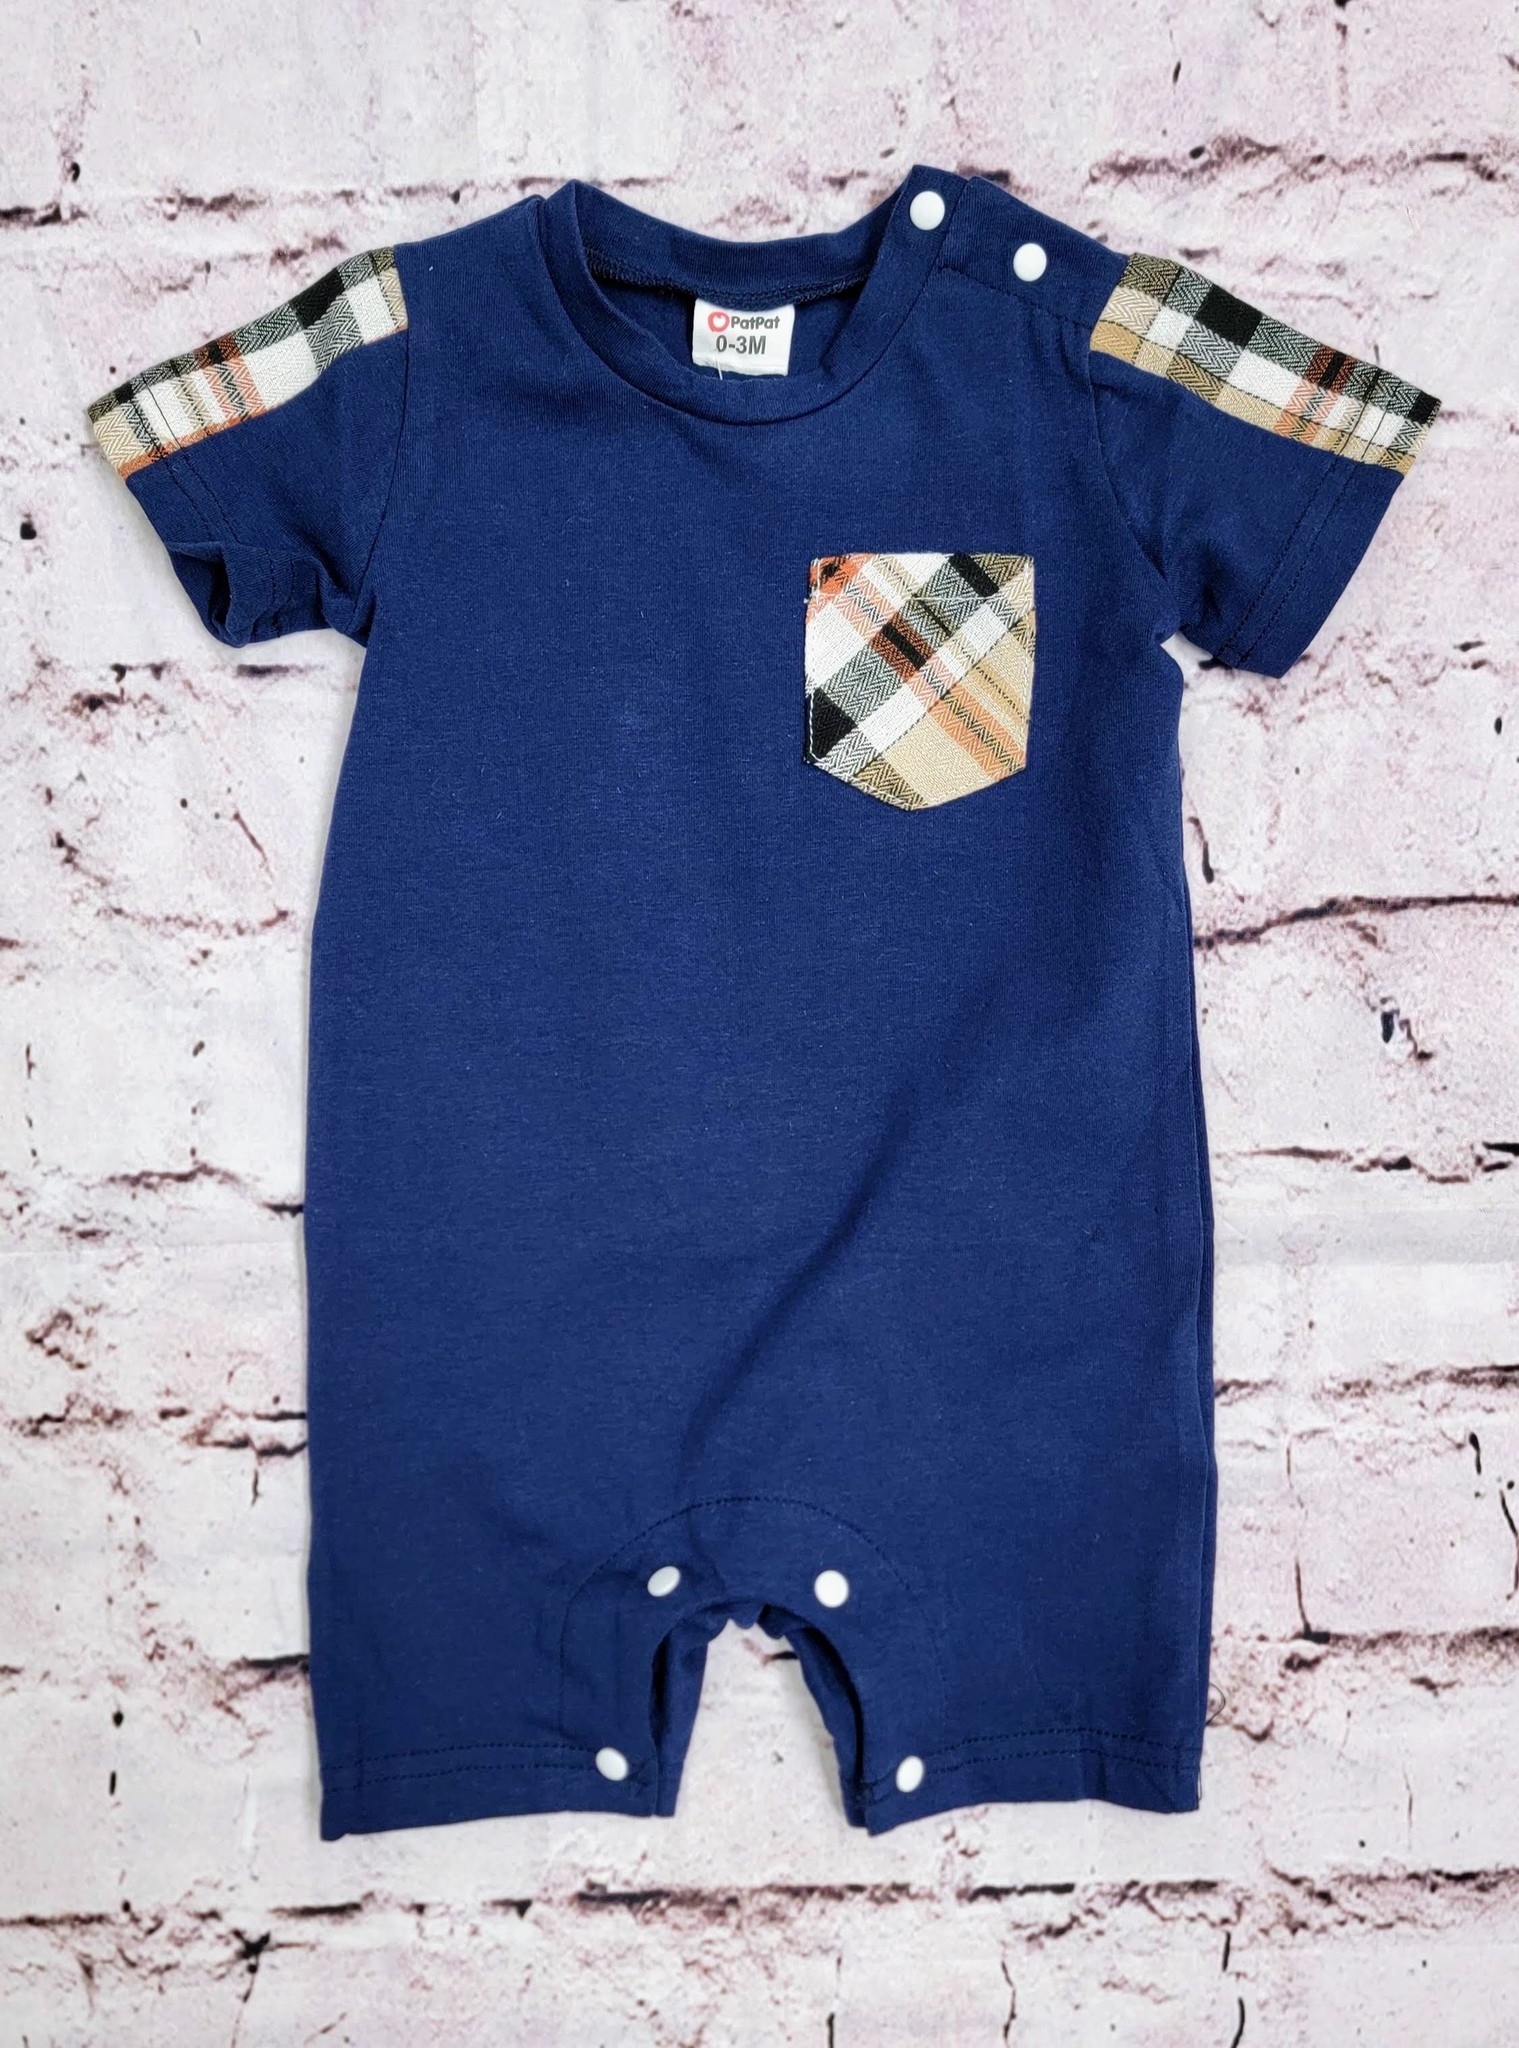 Black Swamp Boots and Apparel Infant Navy/Plaid Shortsleeve Romper